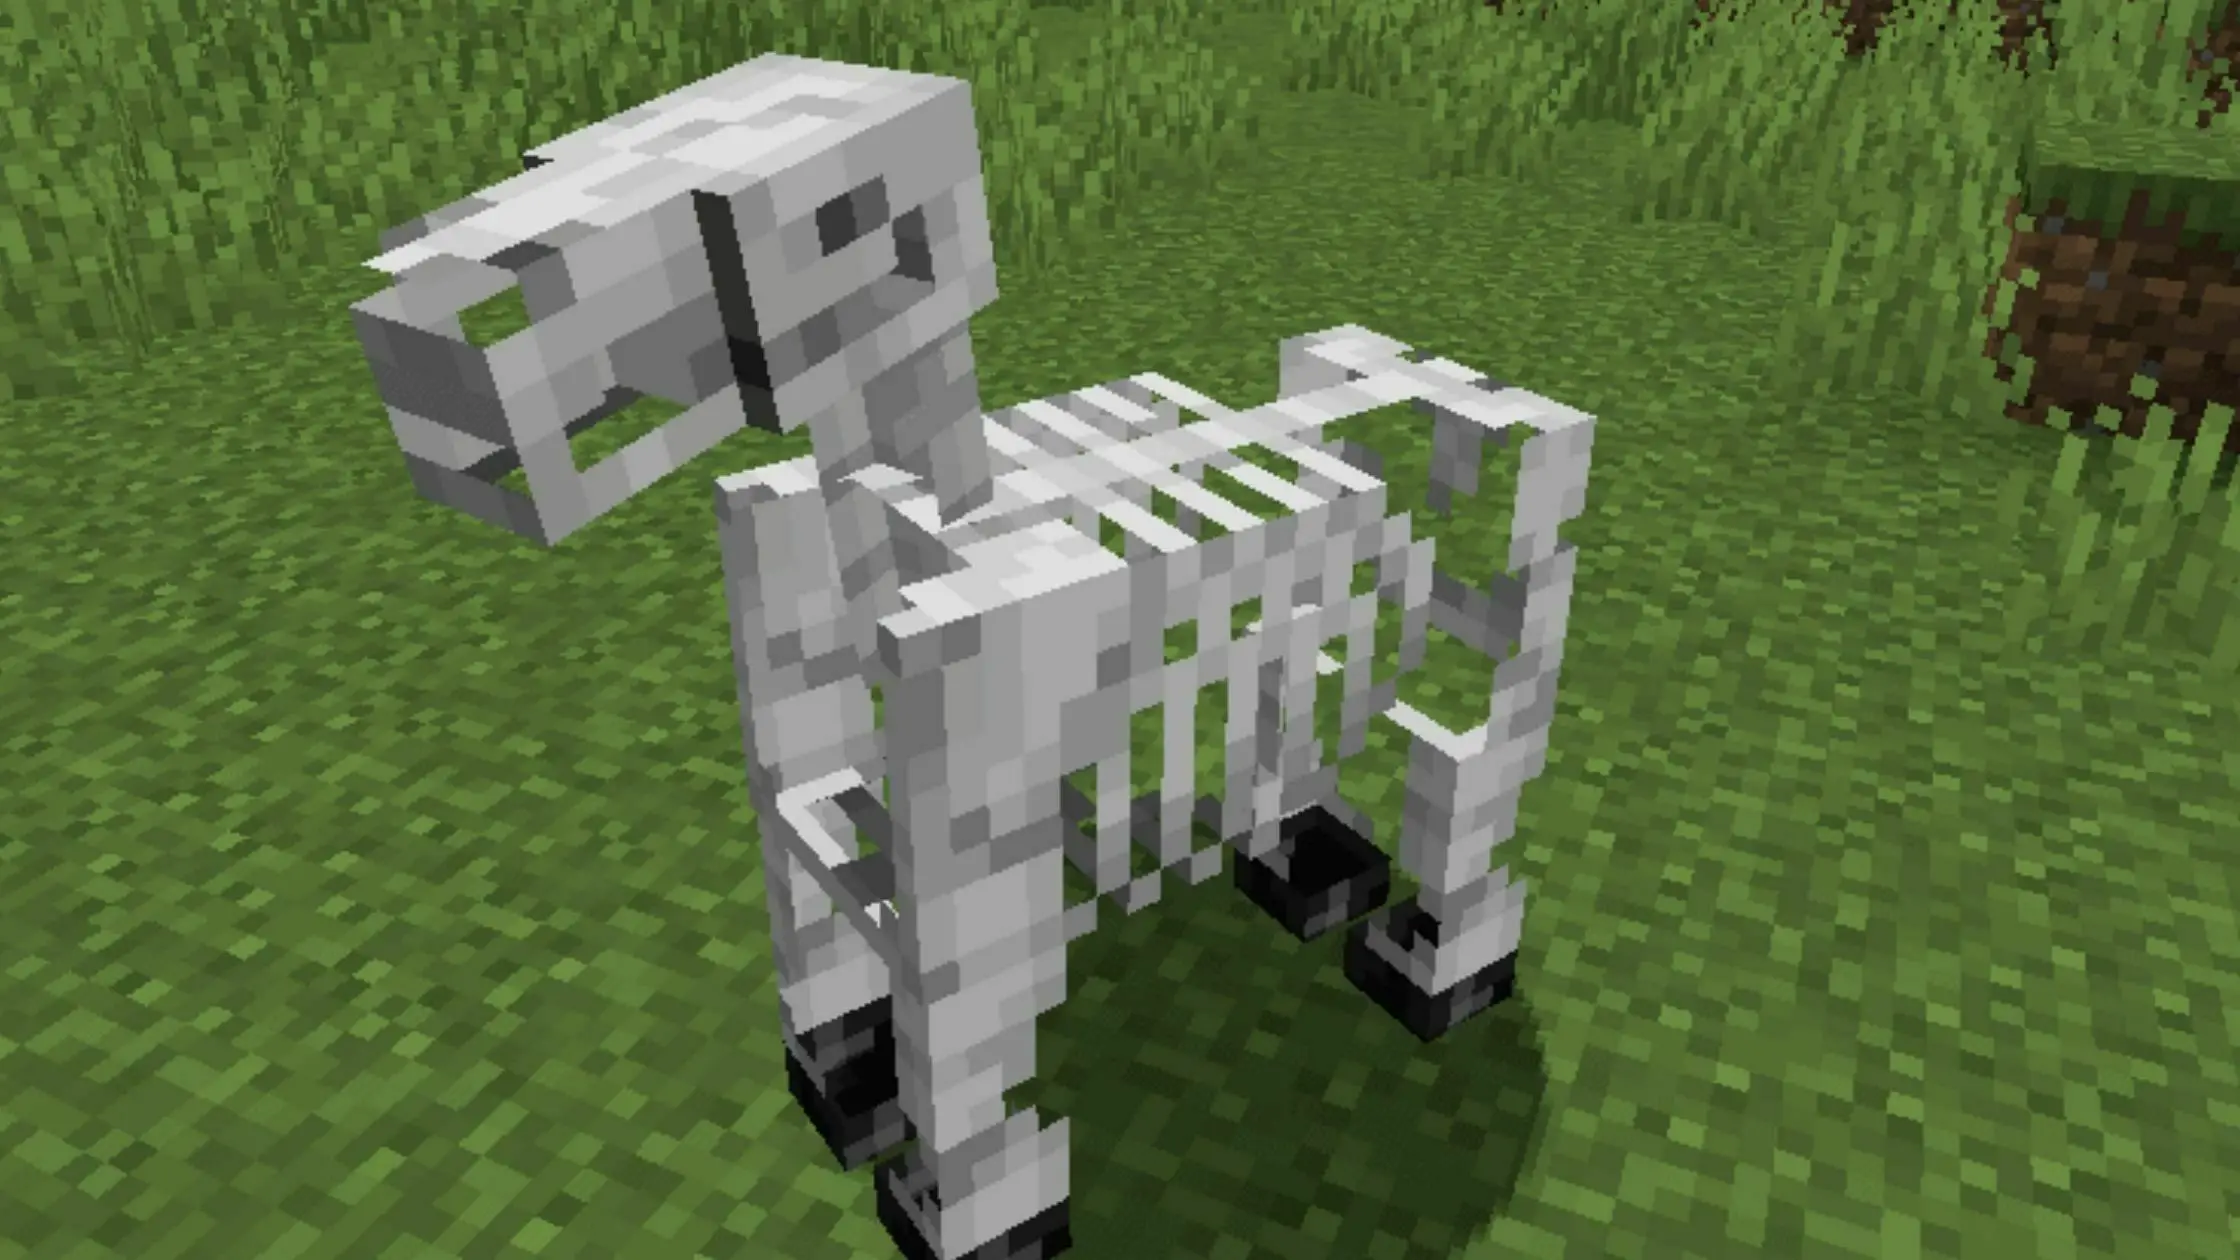 skeleton-horses-in-minecraft-everything-you-need-to-know